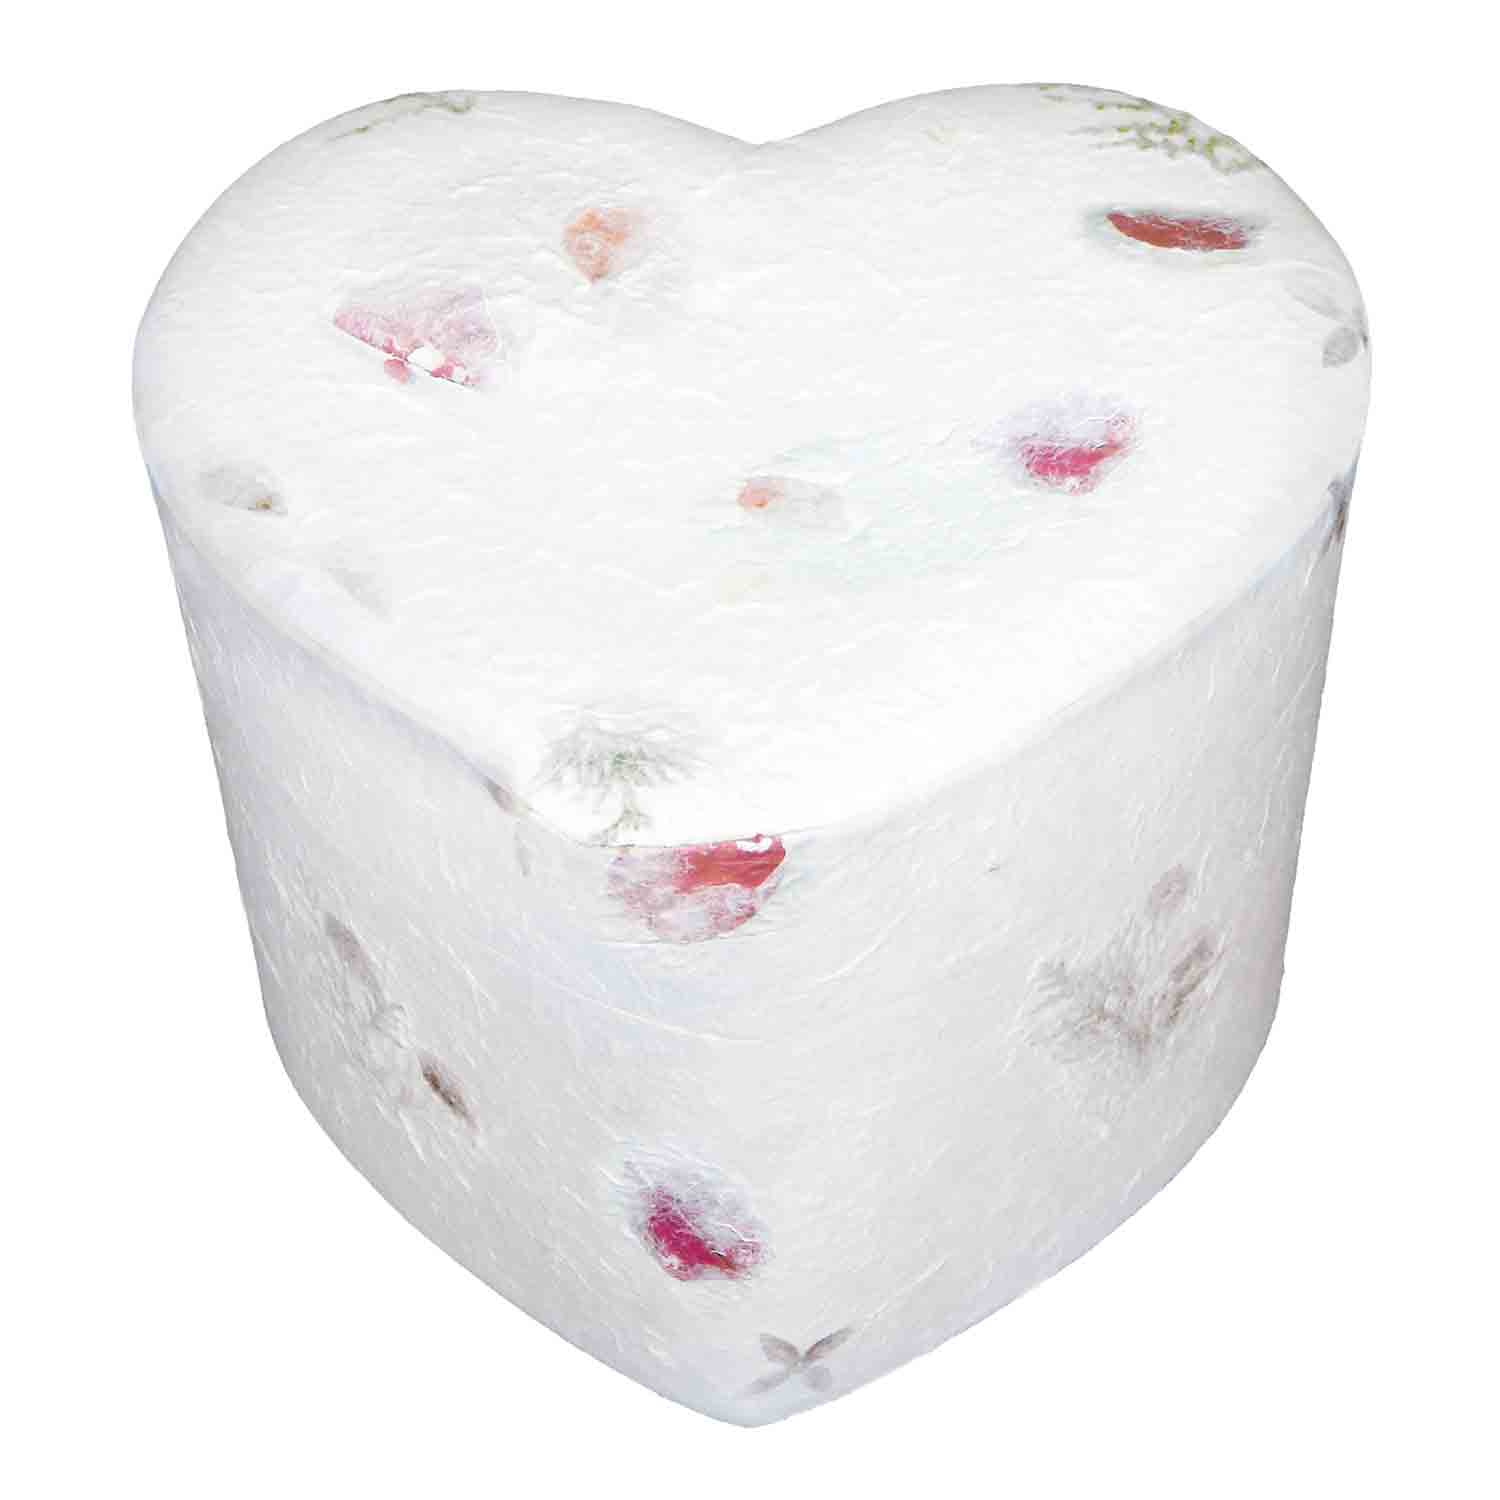 Heart Shaped Biodegradable Urn for Ashes Floral White Companion